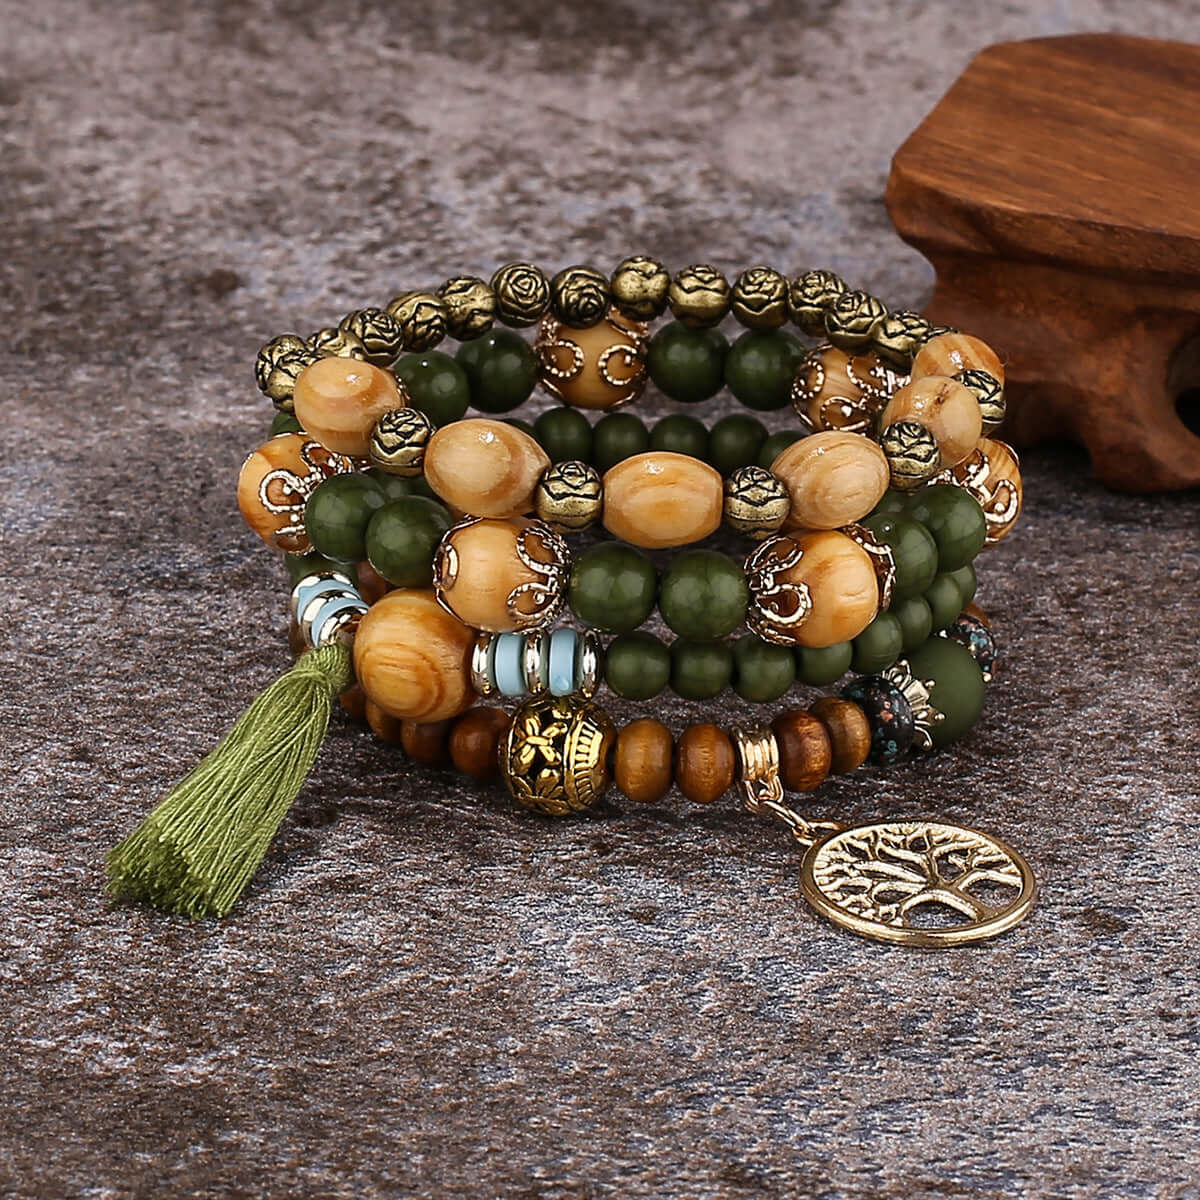 Bohemian Charm: Set of 4 Wooden Bracelets with Tree and Pompon Pendant